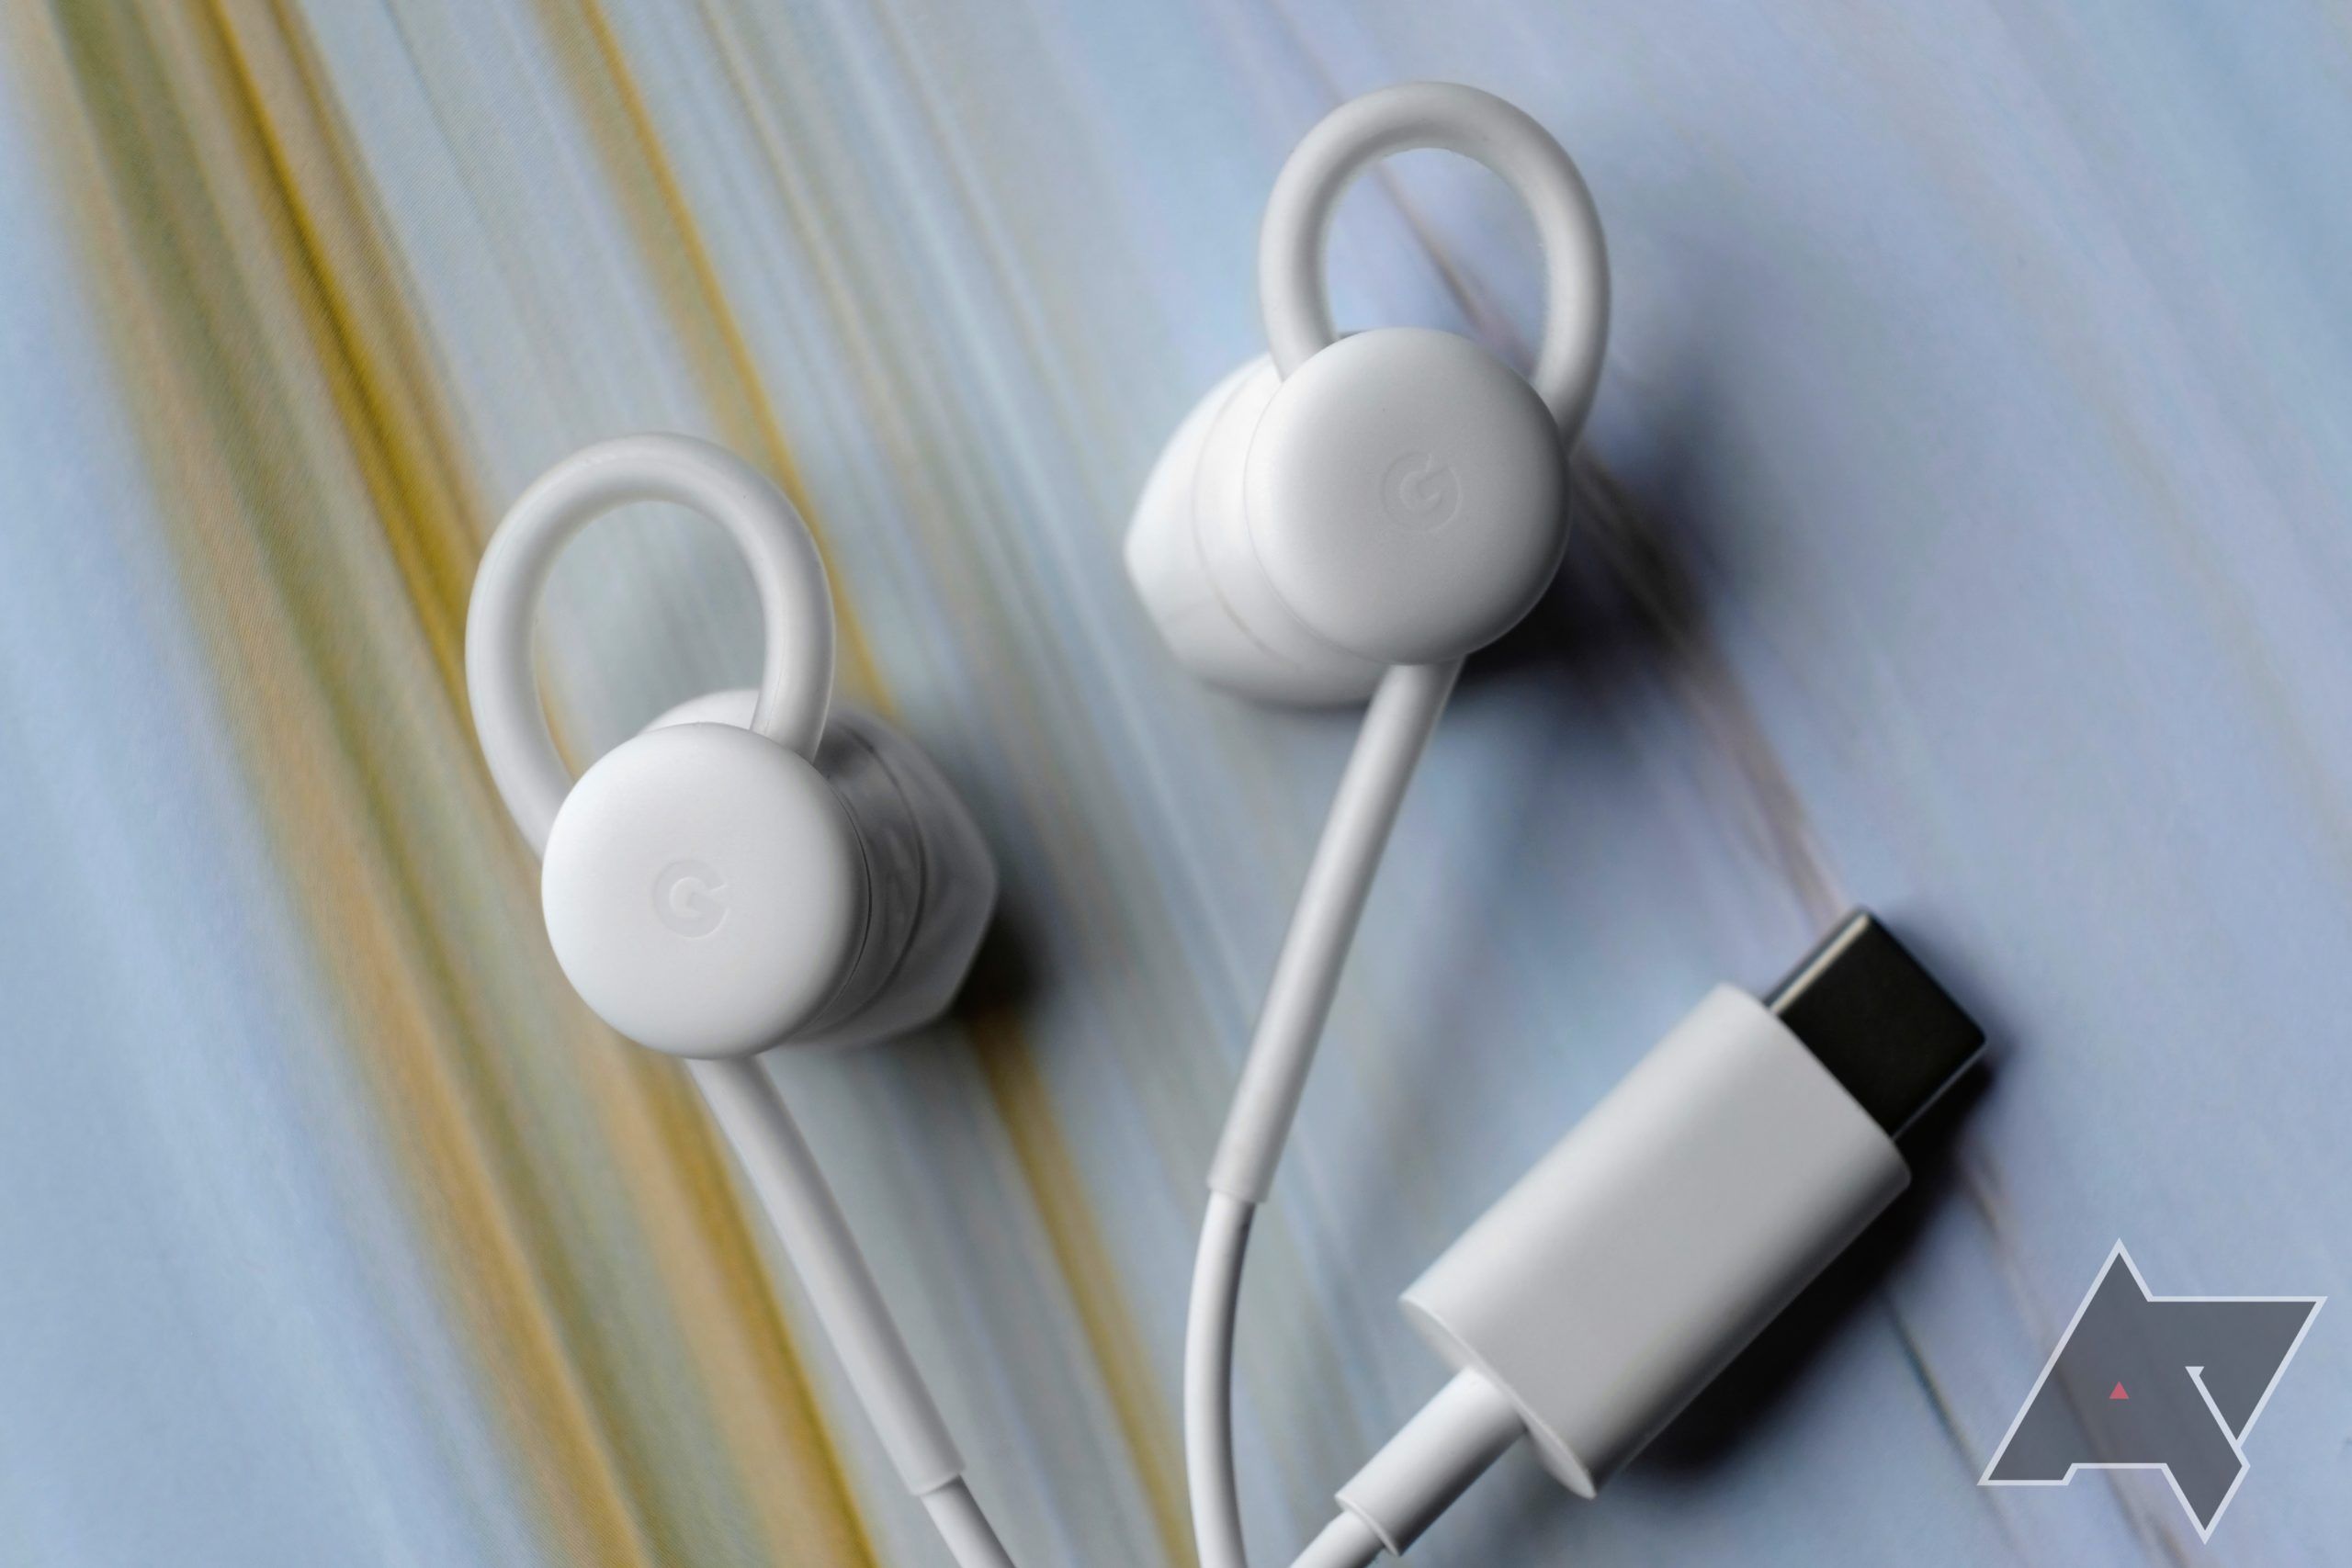 The best USB-C earbuds in